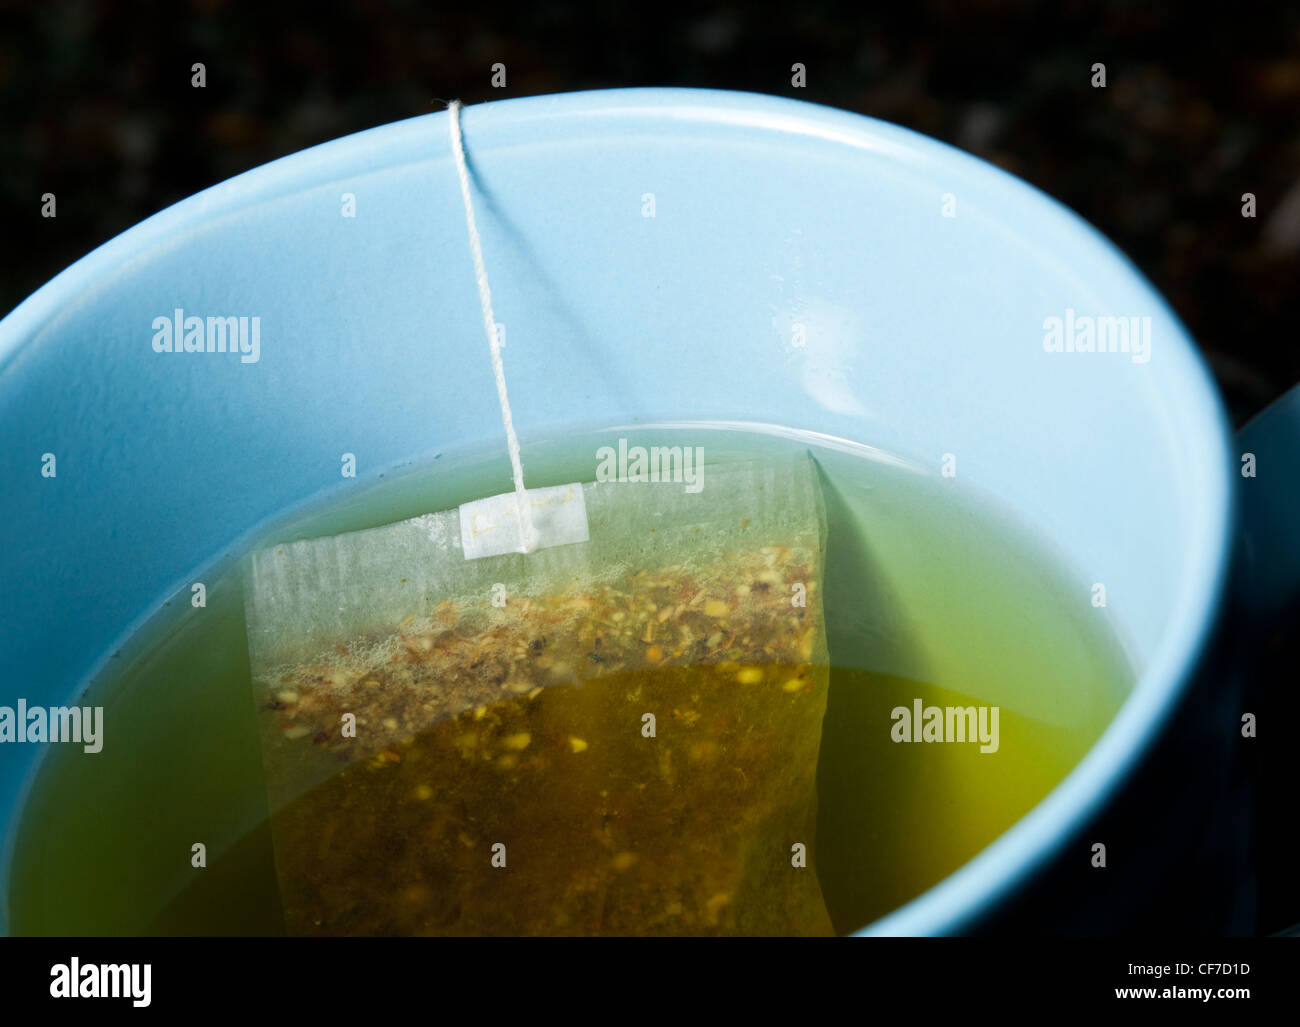 Macro of a green tea teabag brewing in hot water in a blue mug on kitchen worktop Stock Photo